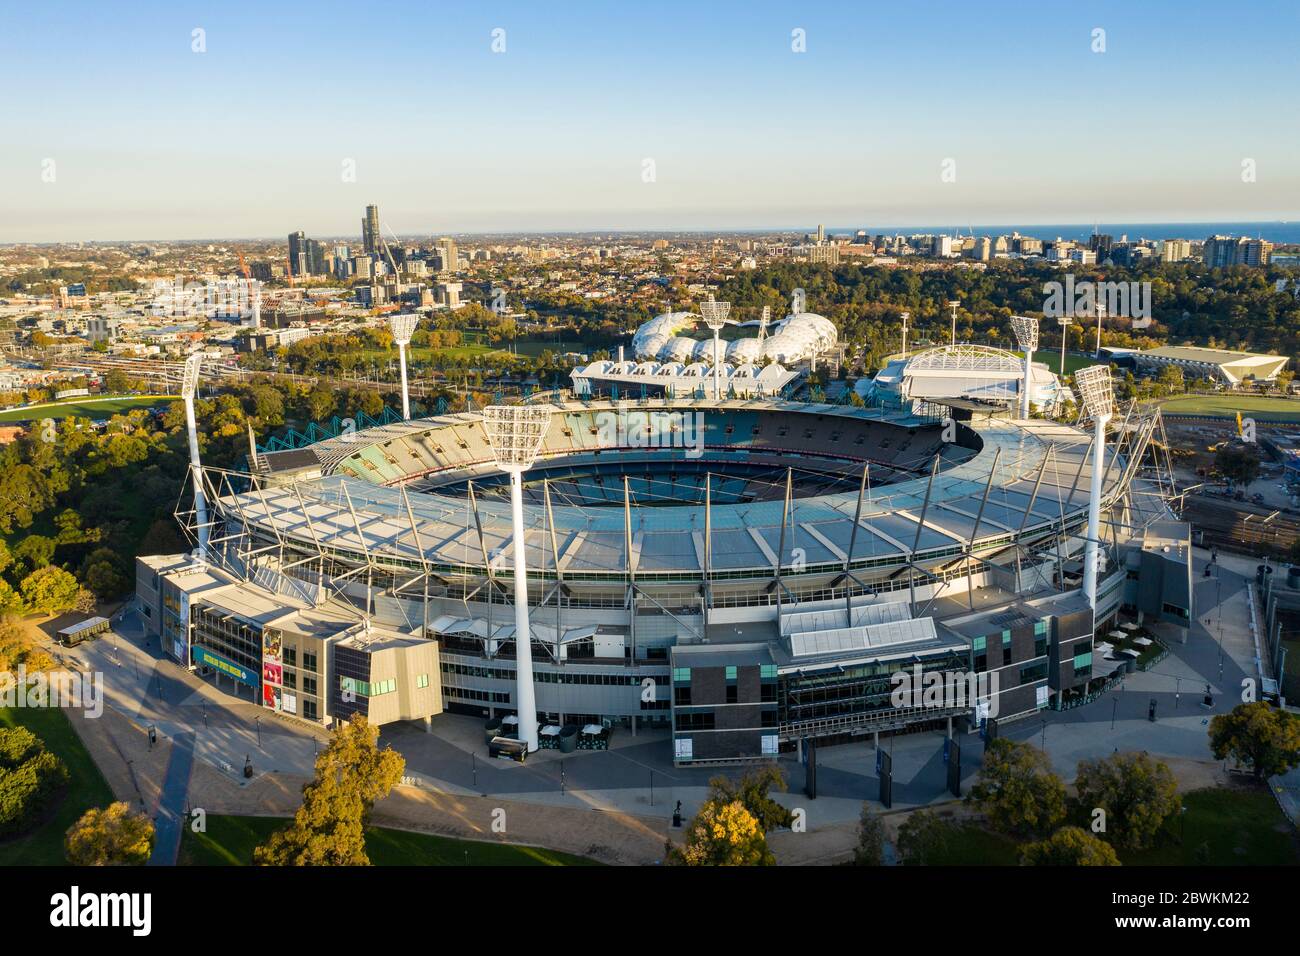 Melbourne Australia May 15th 2020 : Aerial view of the famous Melbourne Cricket Ground stadium  in the late afternoon sun Stock Photo